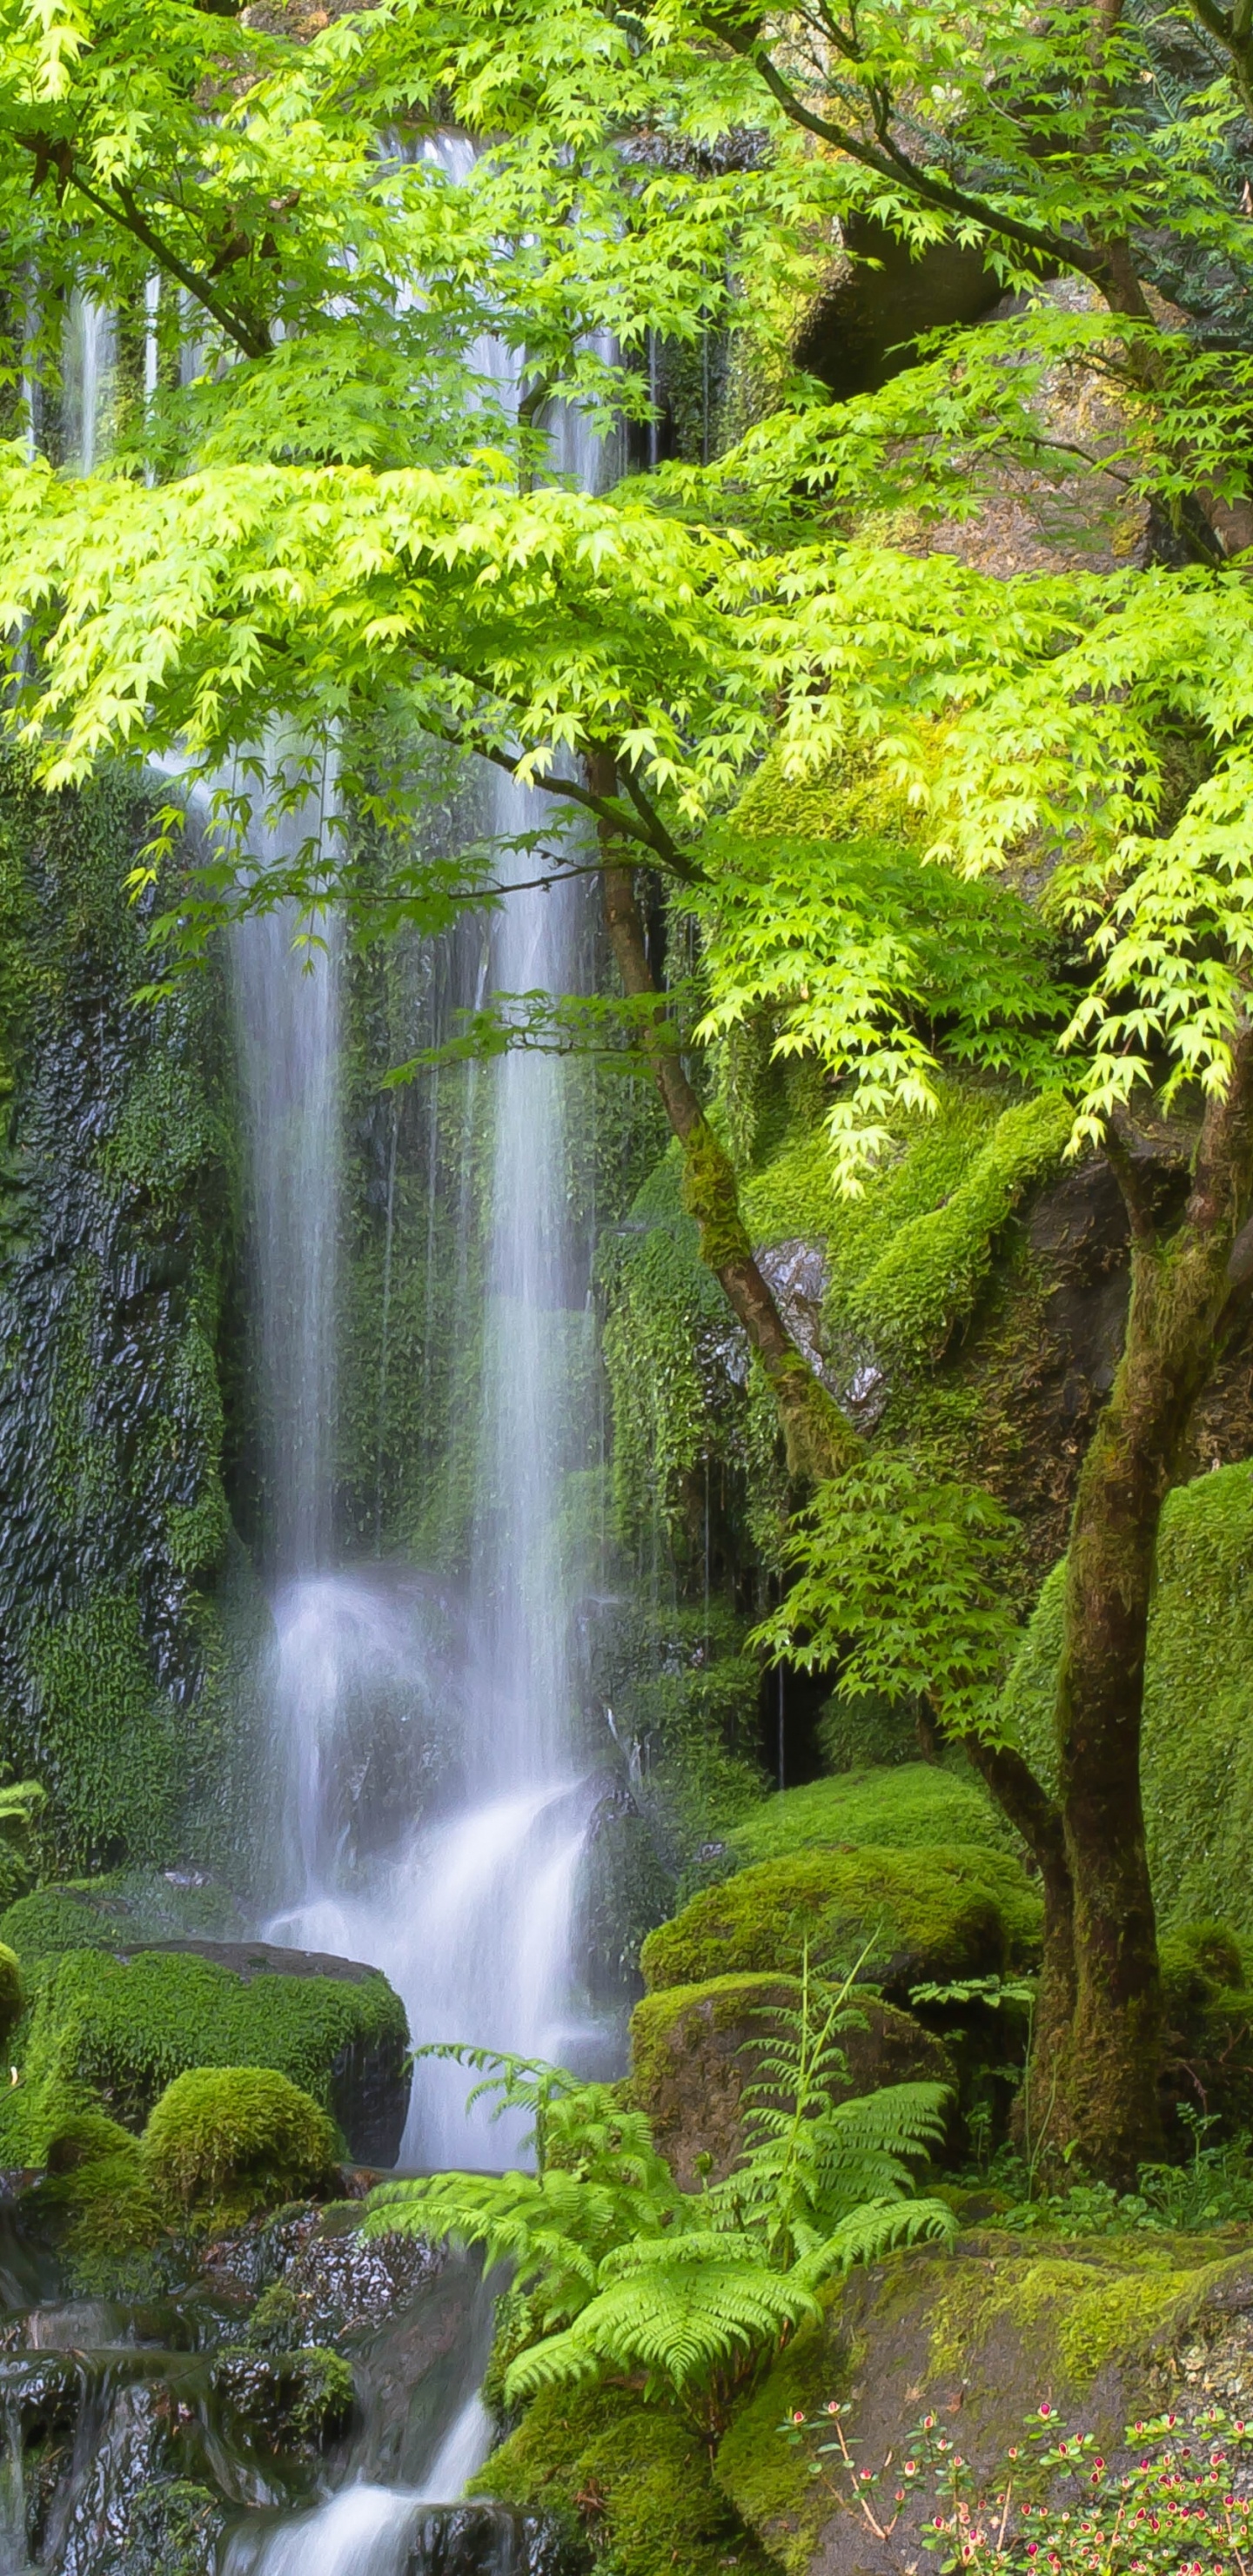 Water Falls in The Forest. Wallpaper in 1440x2960 Resolution